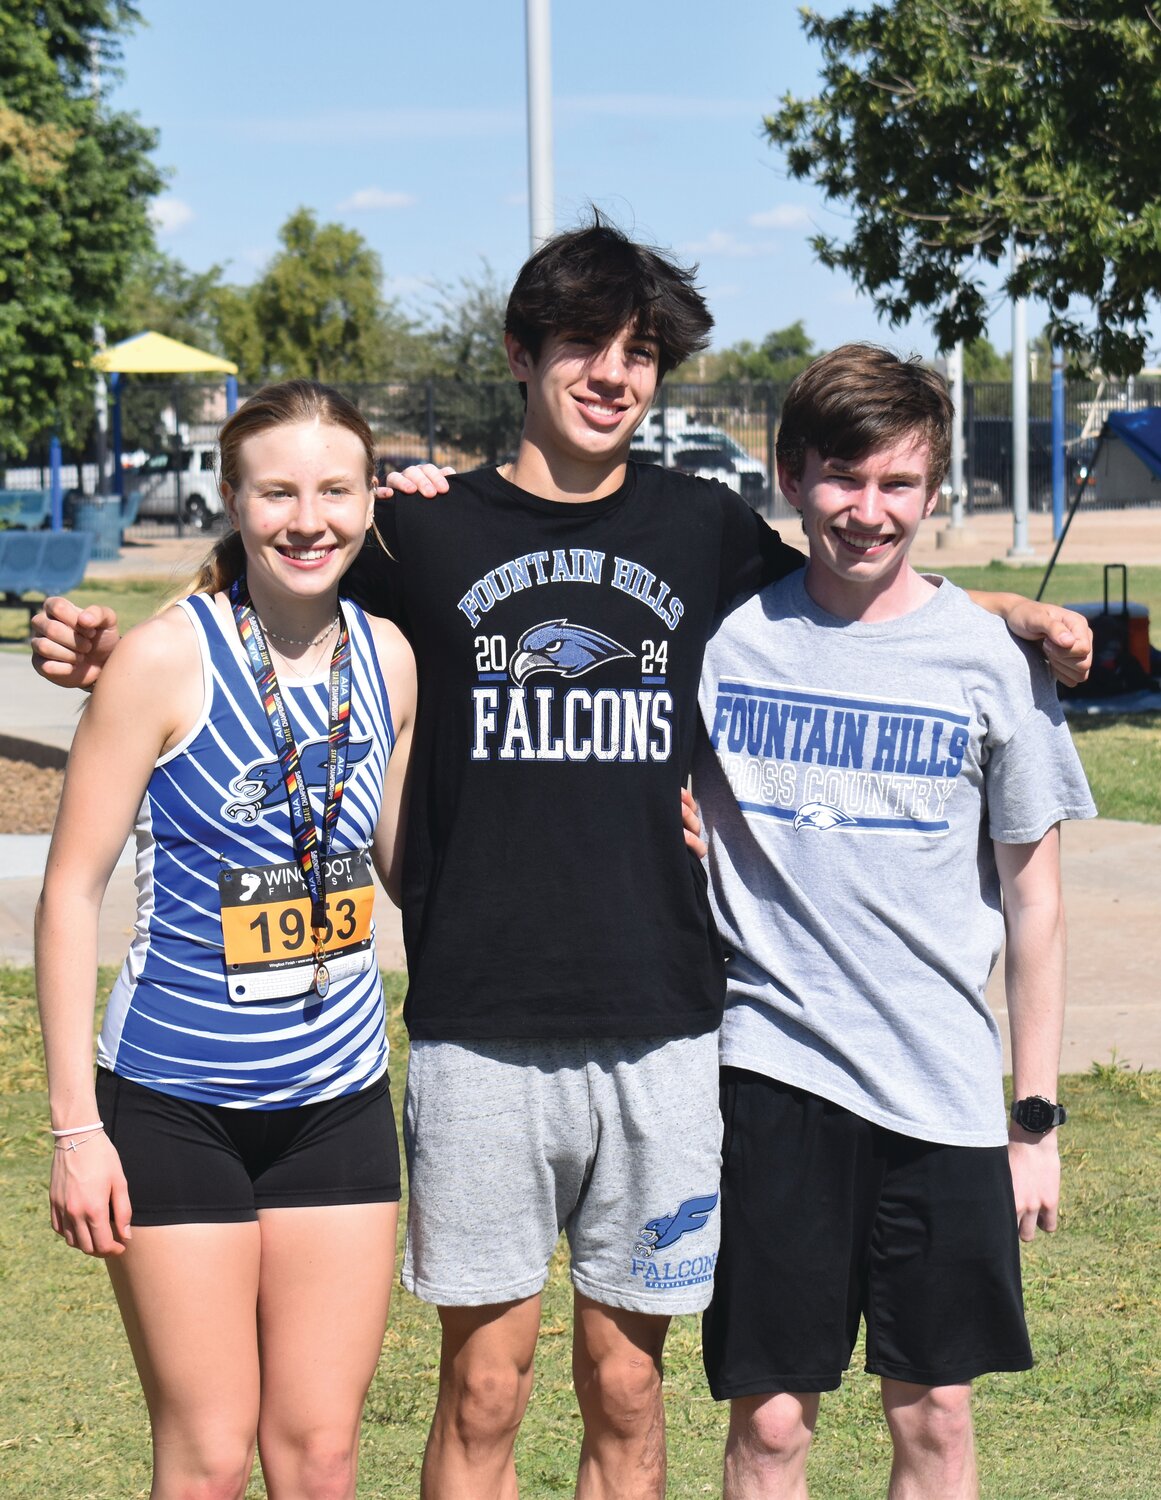 Senior Skye Alker, senior Caleb Lara and sophomore Colby Wright all qualified for the cross country state championship as individual runners. (Independent Newsmedia/George Zeliff)